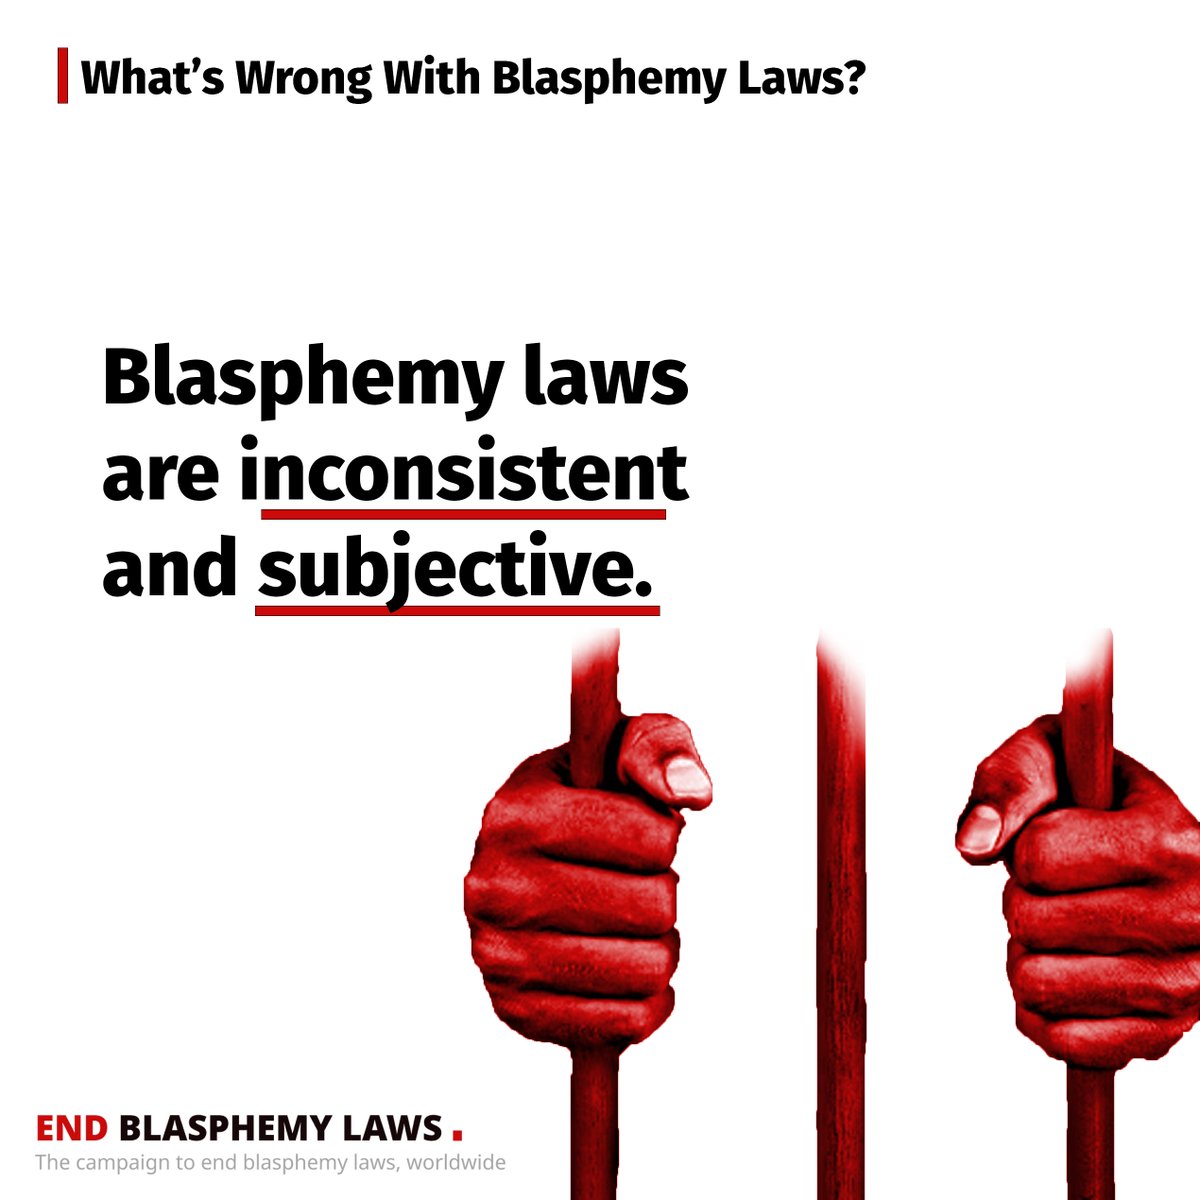 #Nigeria: Yahaya Sharif-Aminu, who was sentenced to death by hanging in 2020 after being convicted of #blasphemy by an Islamic court, has appealed a High Court ruling that he be retried. He is seeking this outright acquittal. #EndBlasphemyLaws More: saharareporters.com/2022/02/02/kan…